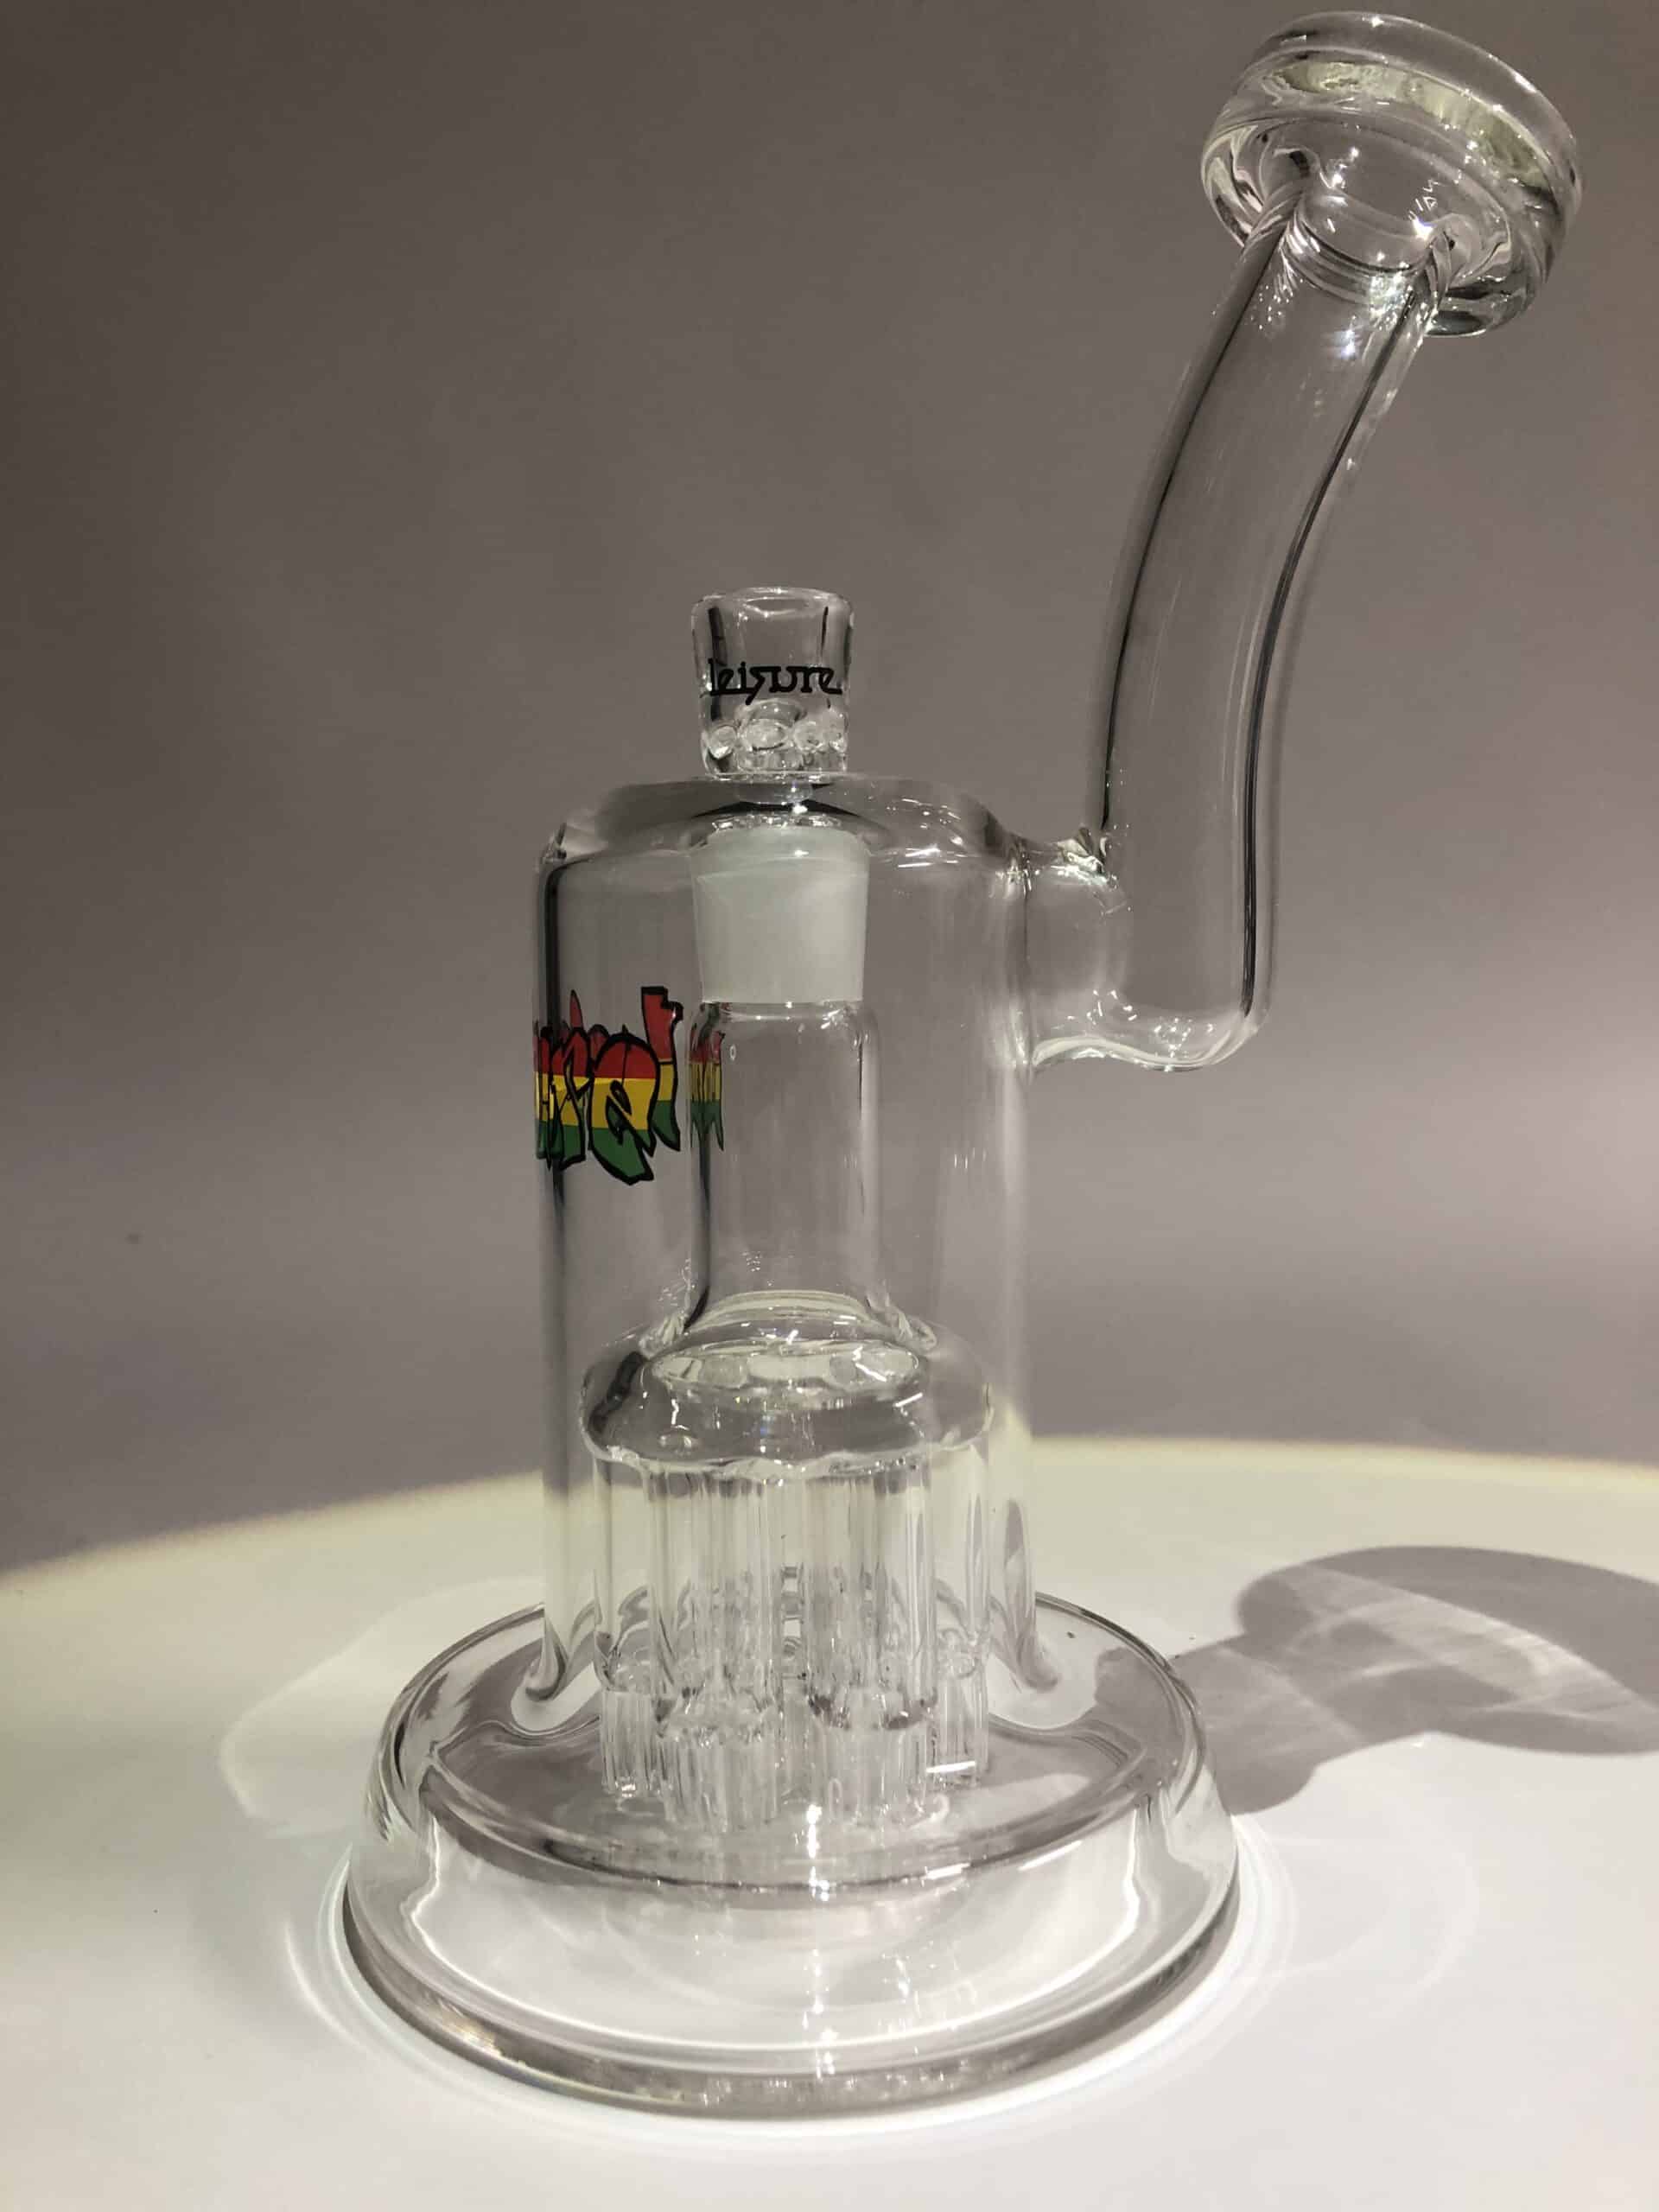 exquisite design of the (L30) 44-Arm Mag Mini Bubbler by Leisure